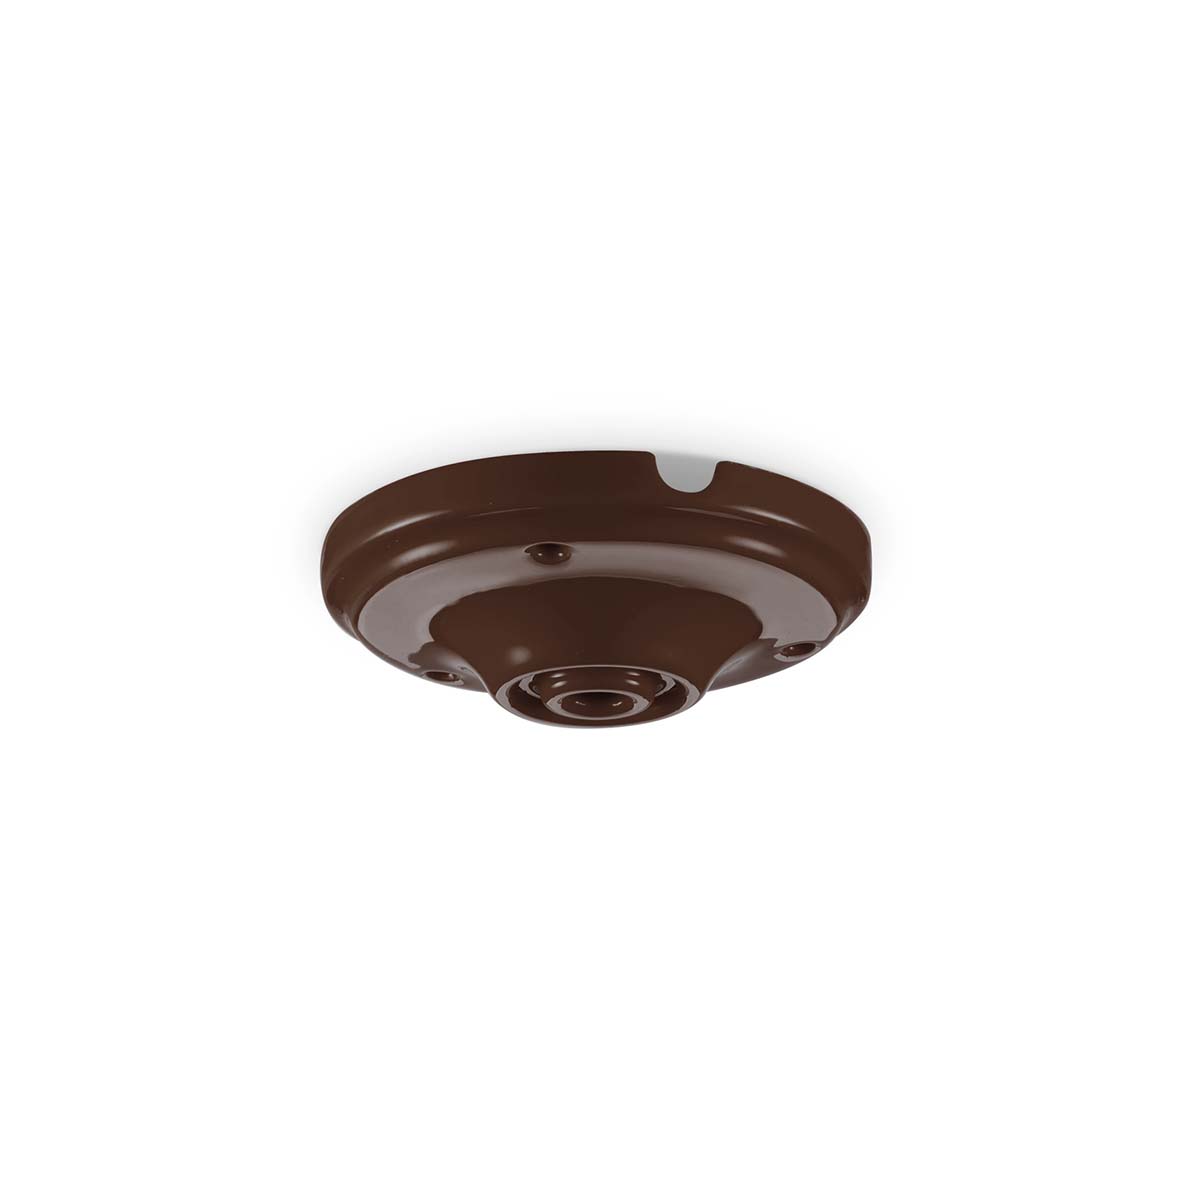 Tangla lighting - TLCP023-01BN - porcelain 1 Light round canopy frisbee - brown